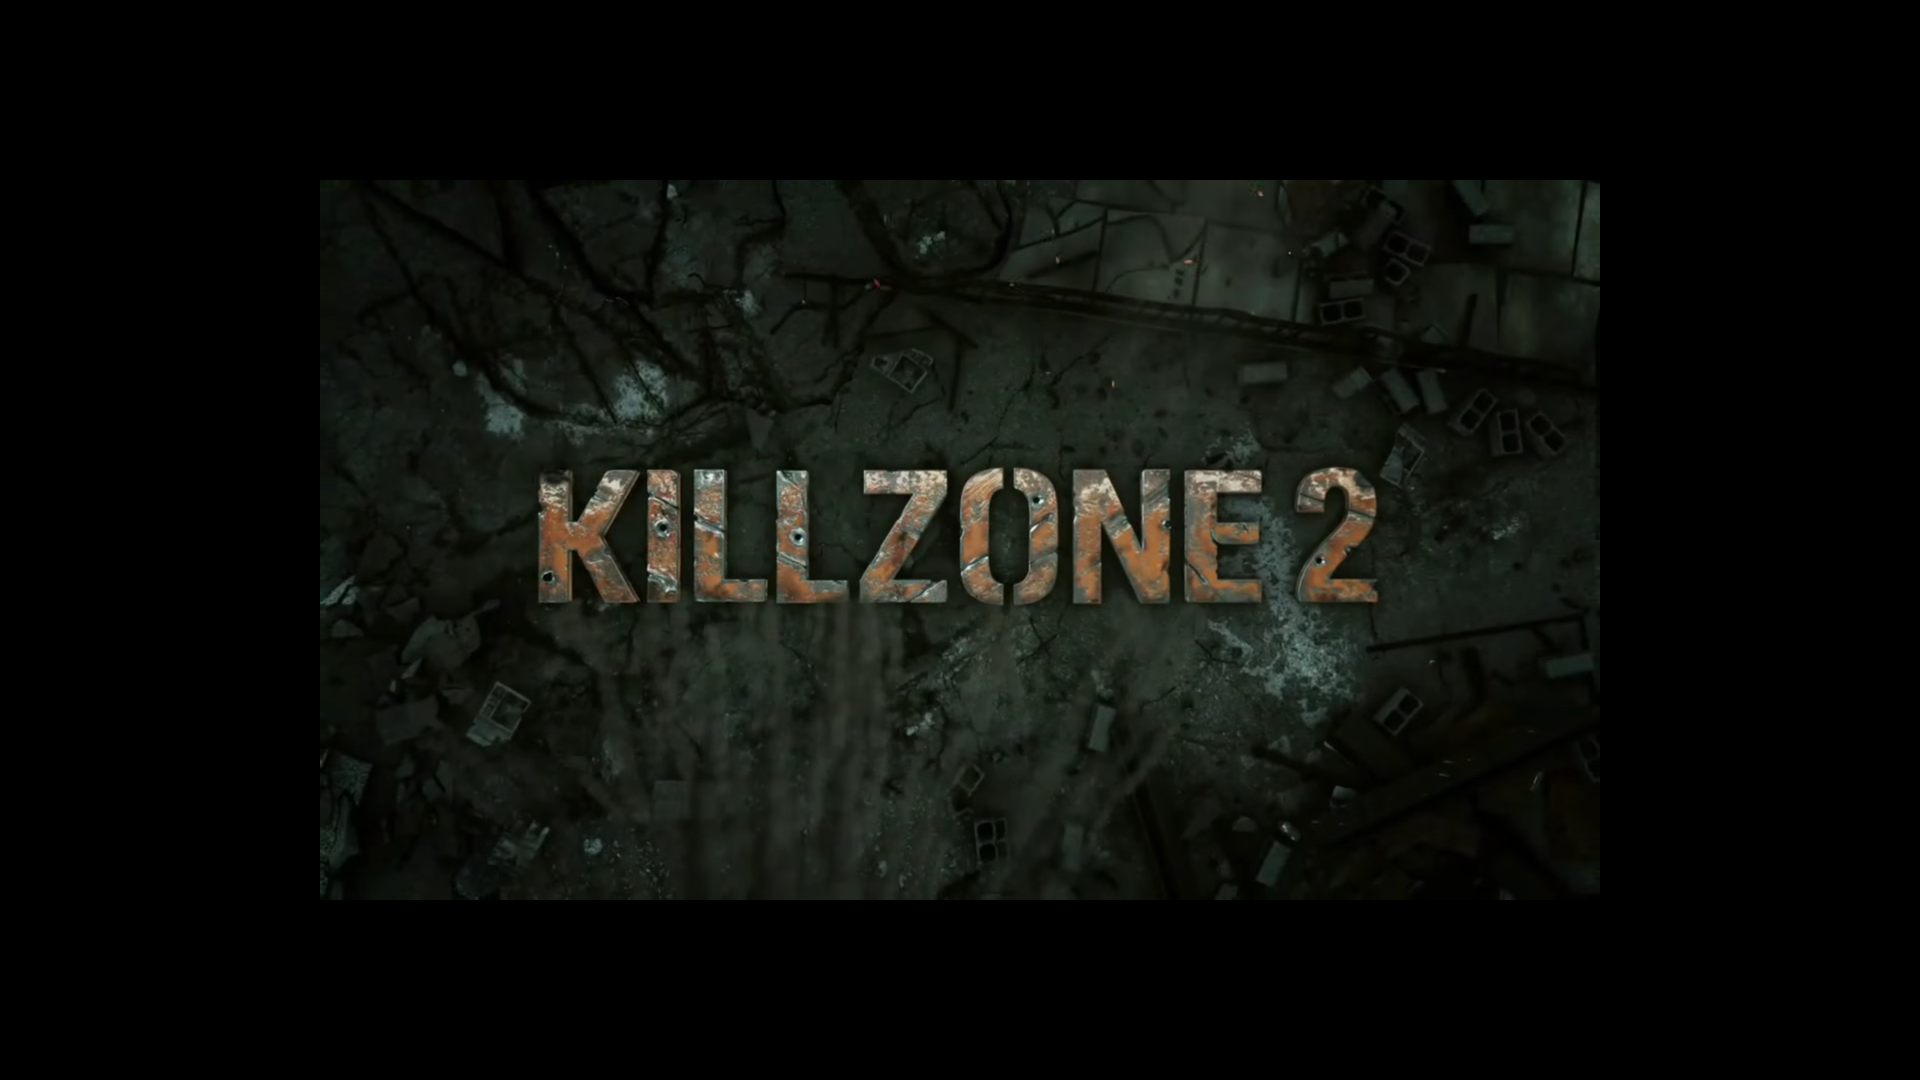 The 2005 'Killzone 2' Debacle and What It Means for Game Trailer